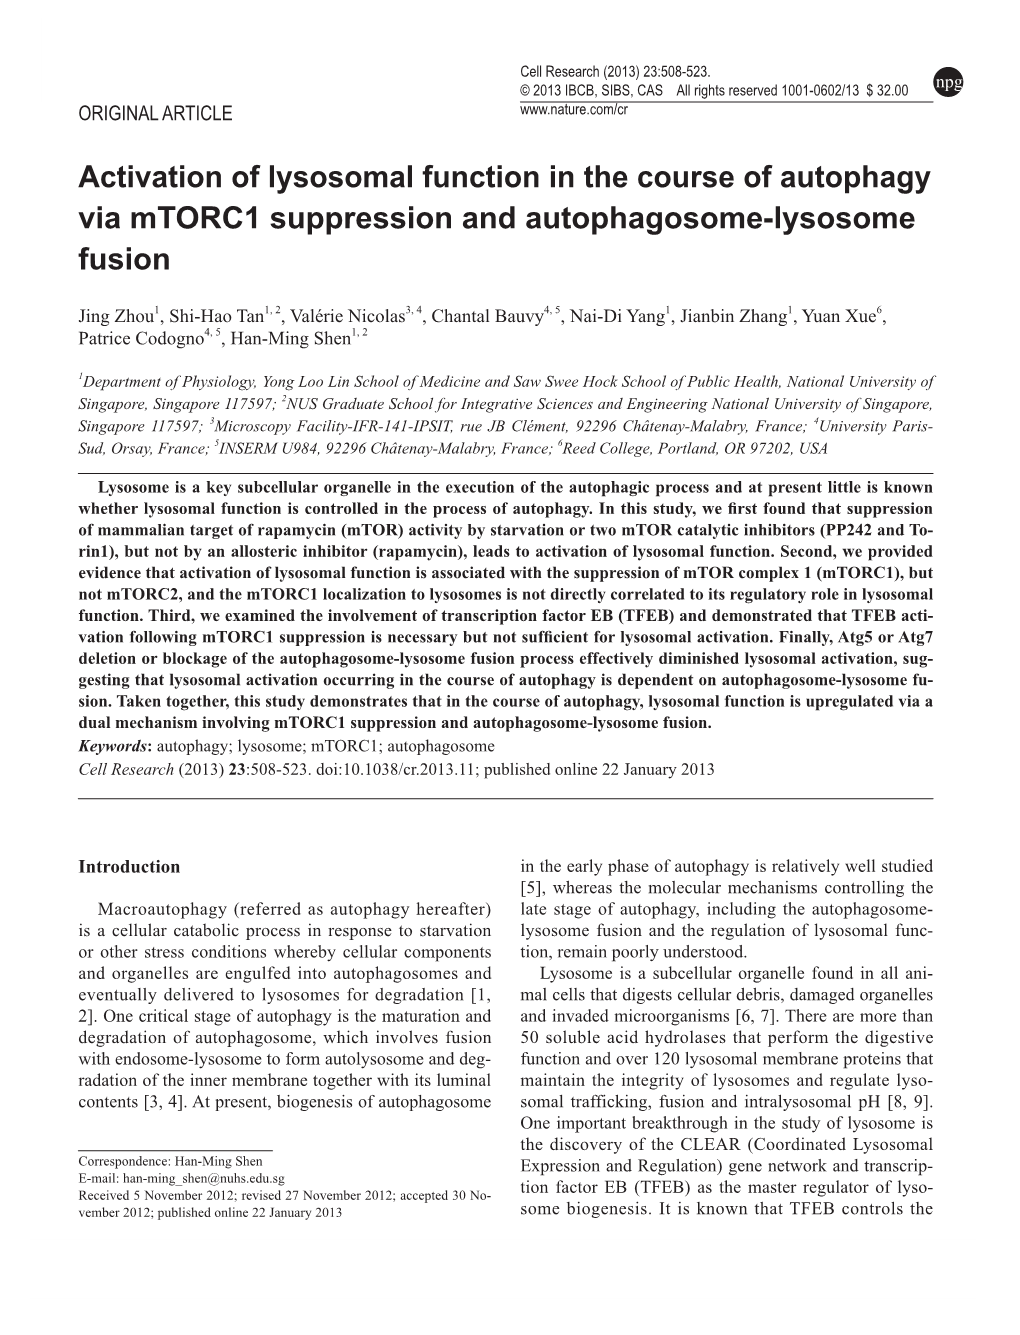 Activation of Lysosomal Function in the Course of Autophagy Via Mtorc1 Suppression and Autophagosome-Lysosome Fusion